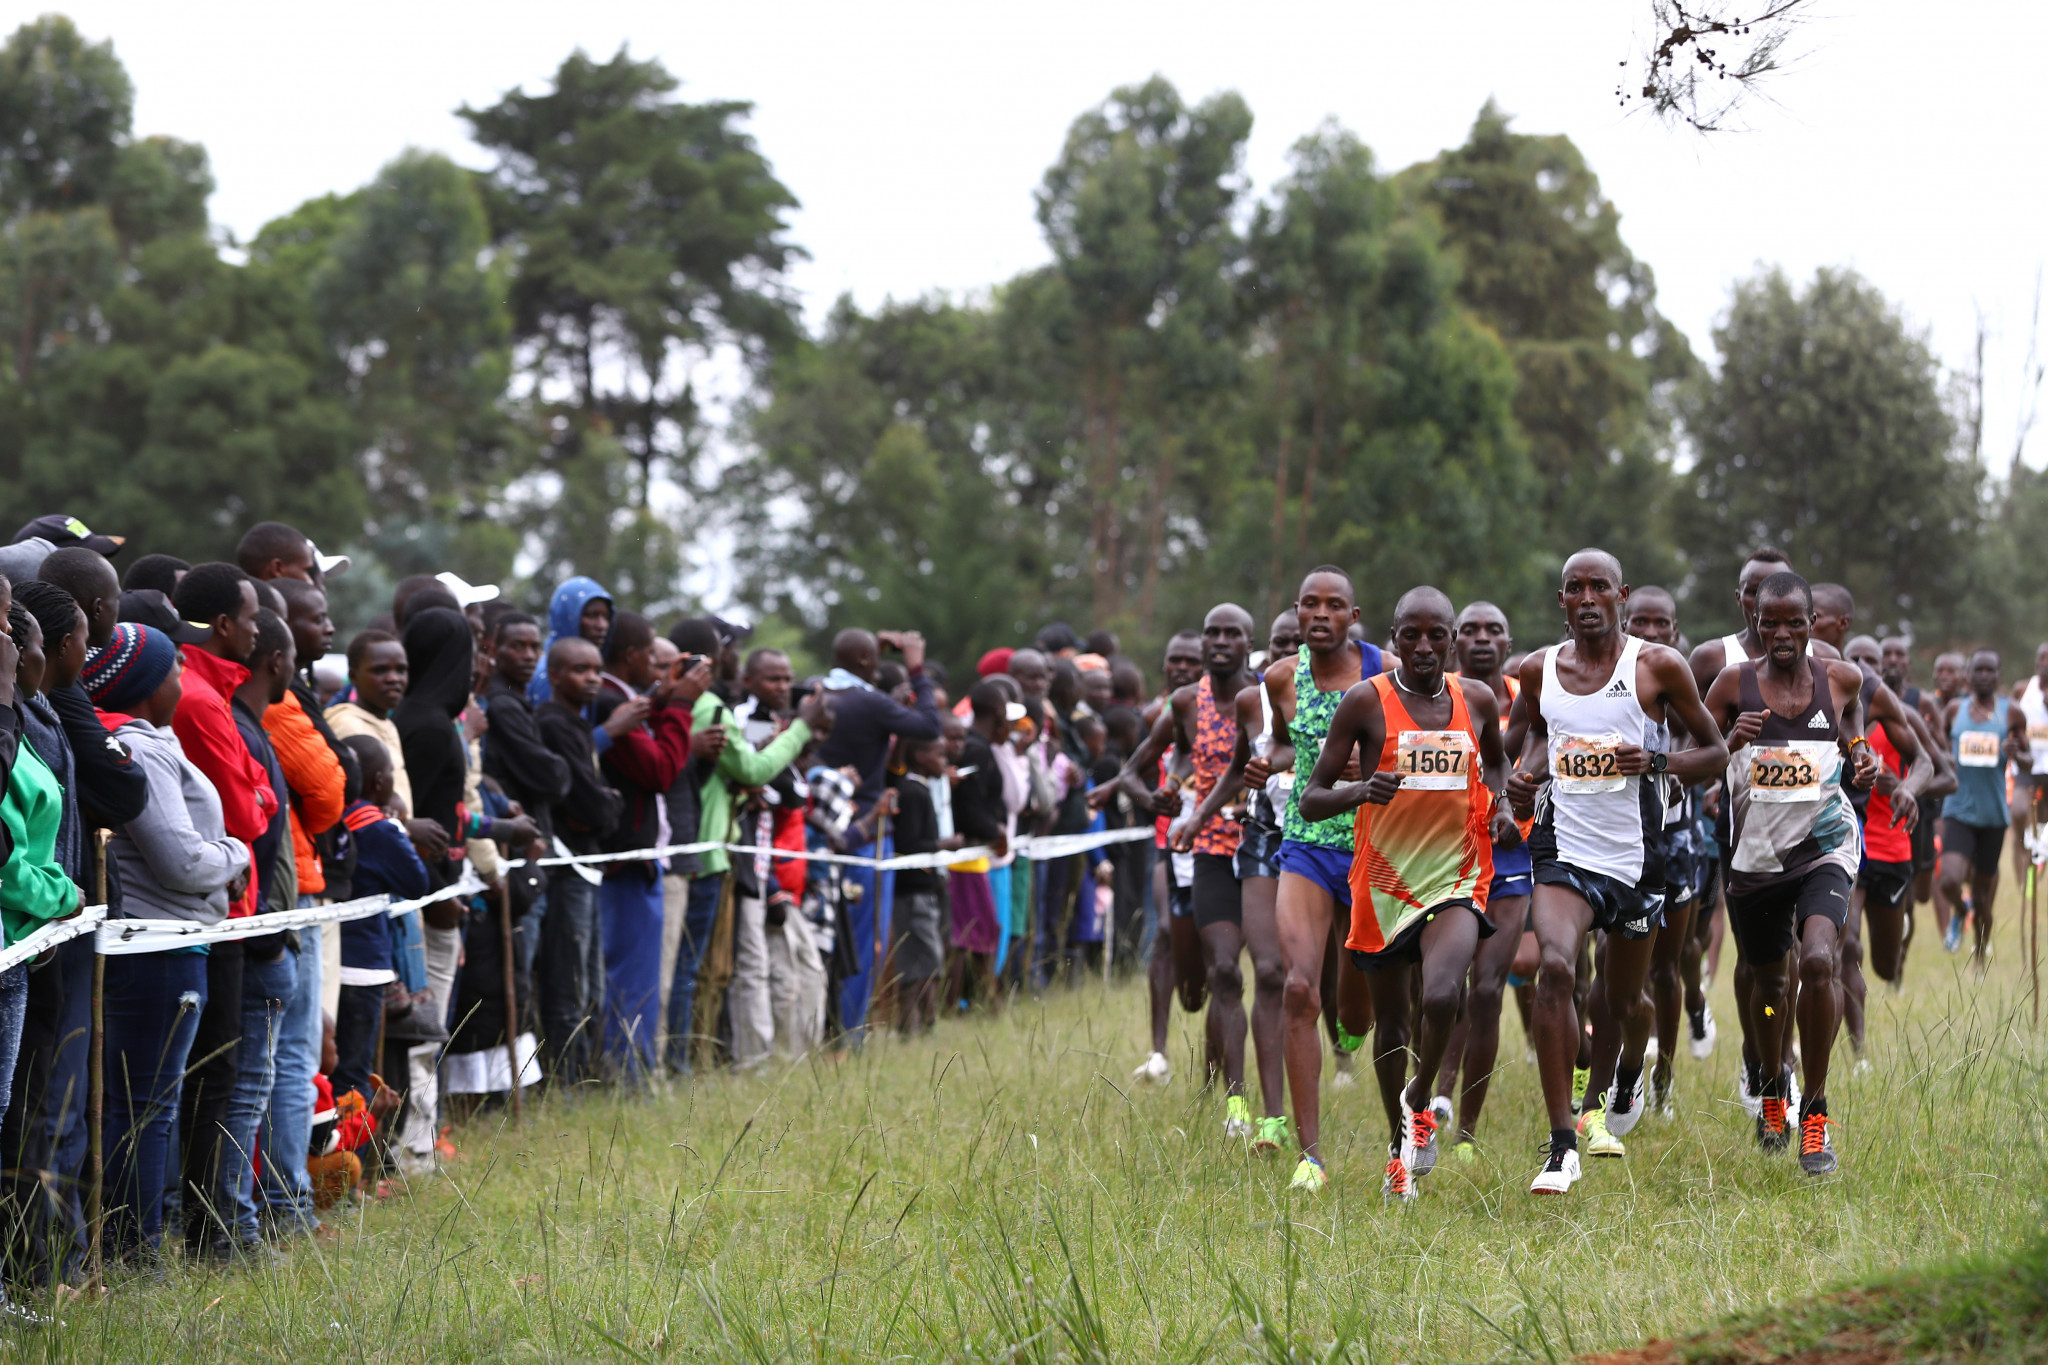 African Cross Country Championships in Togo postponed due to COVID-19 concerns